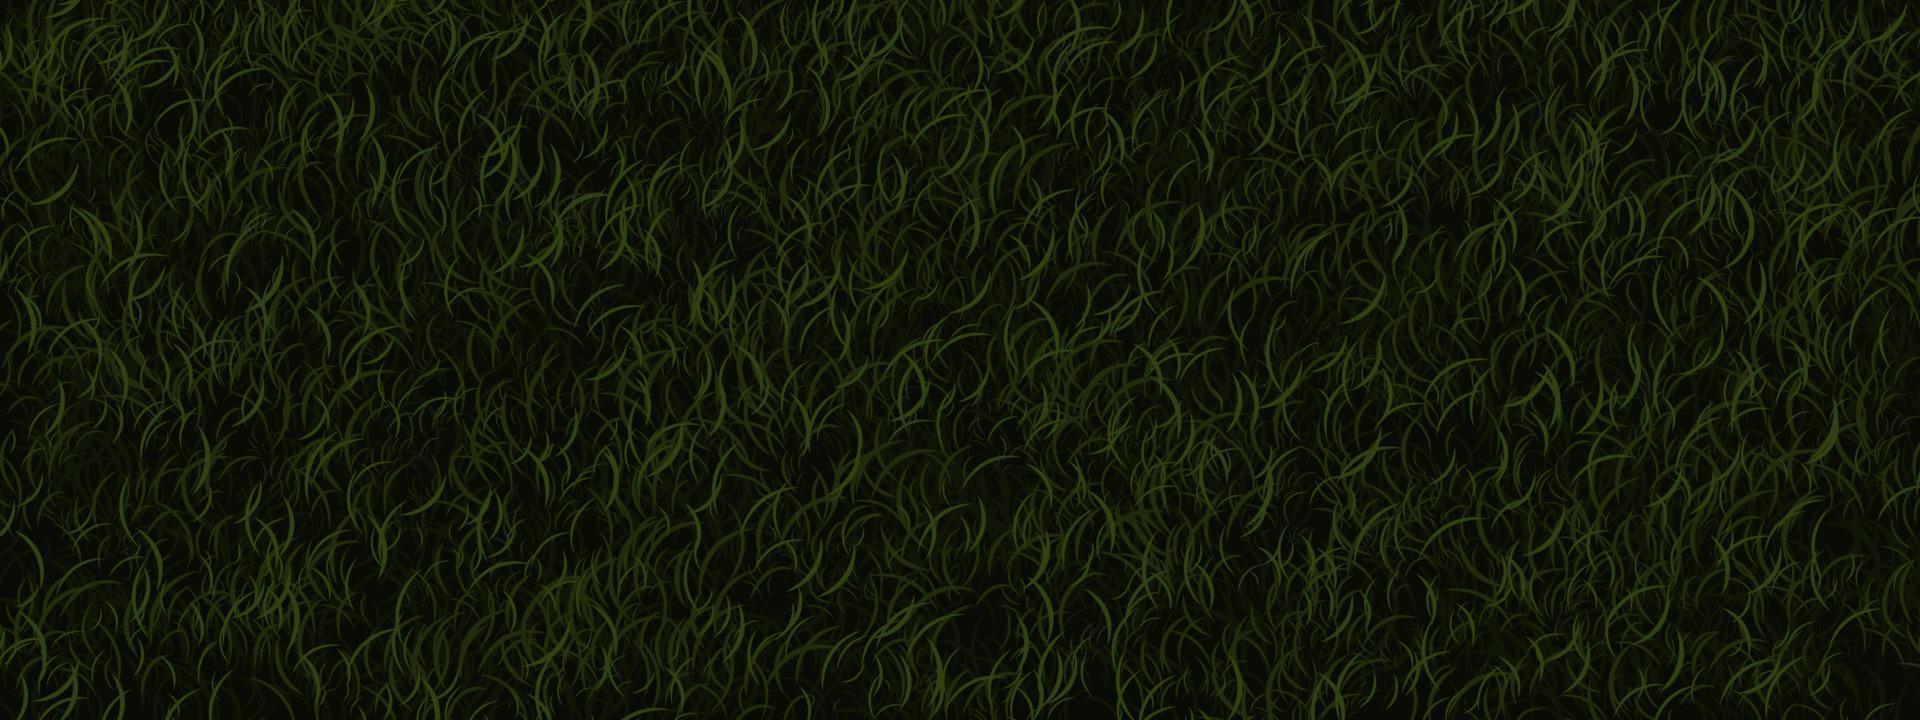 Realistic green grass field seamless background vector